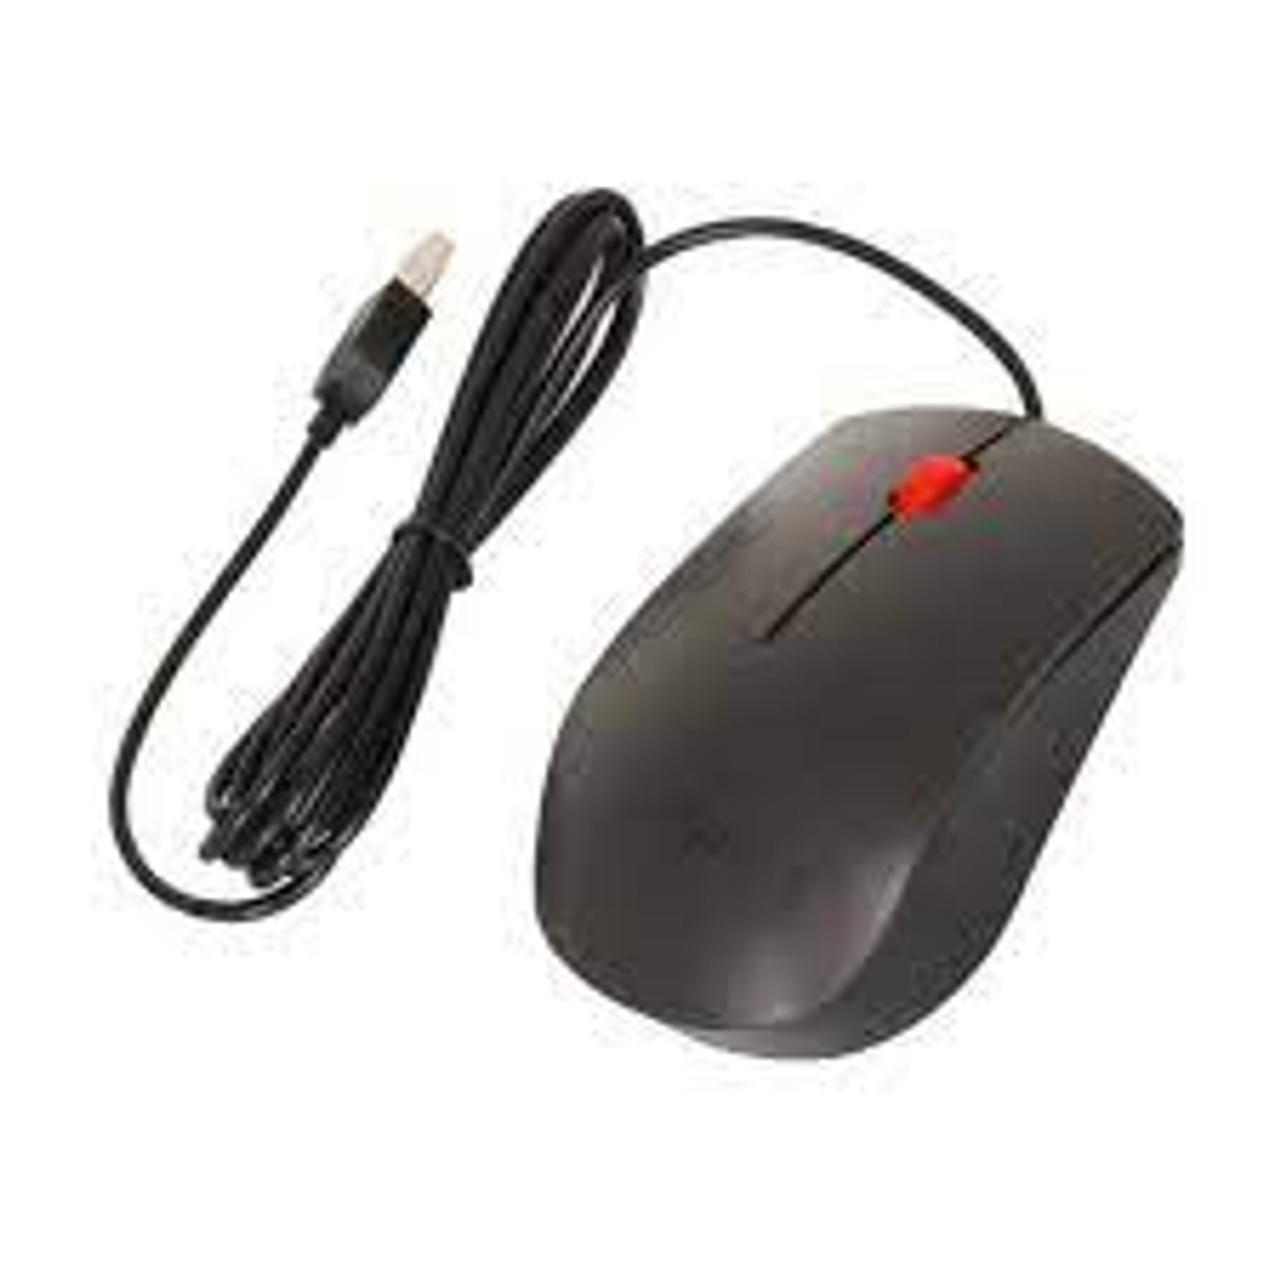 Lenovo USB Wired Optical Mouse SM-8823